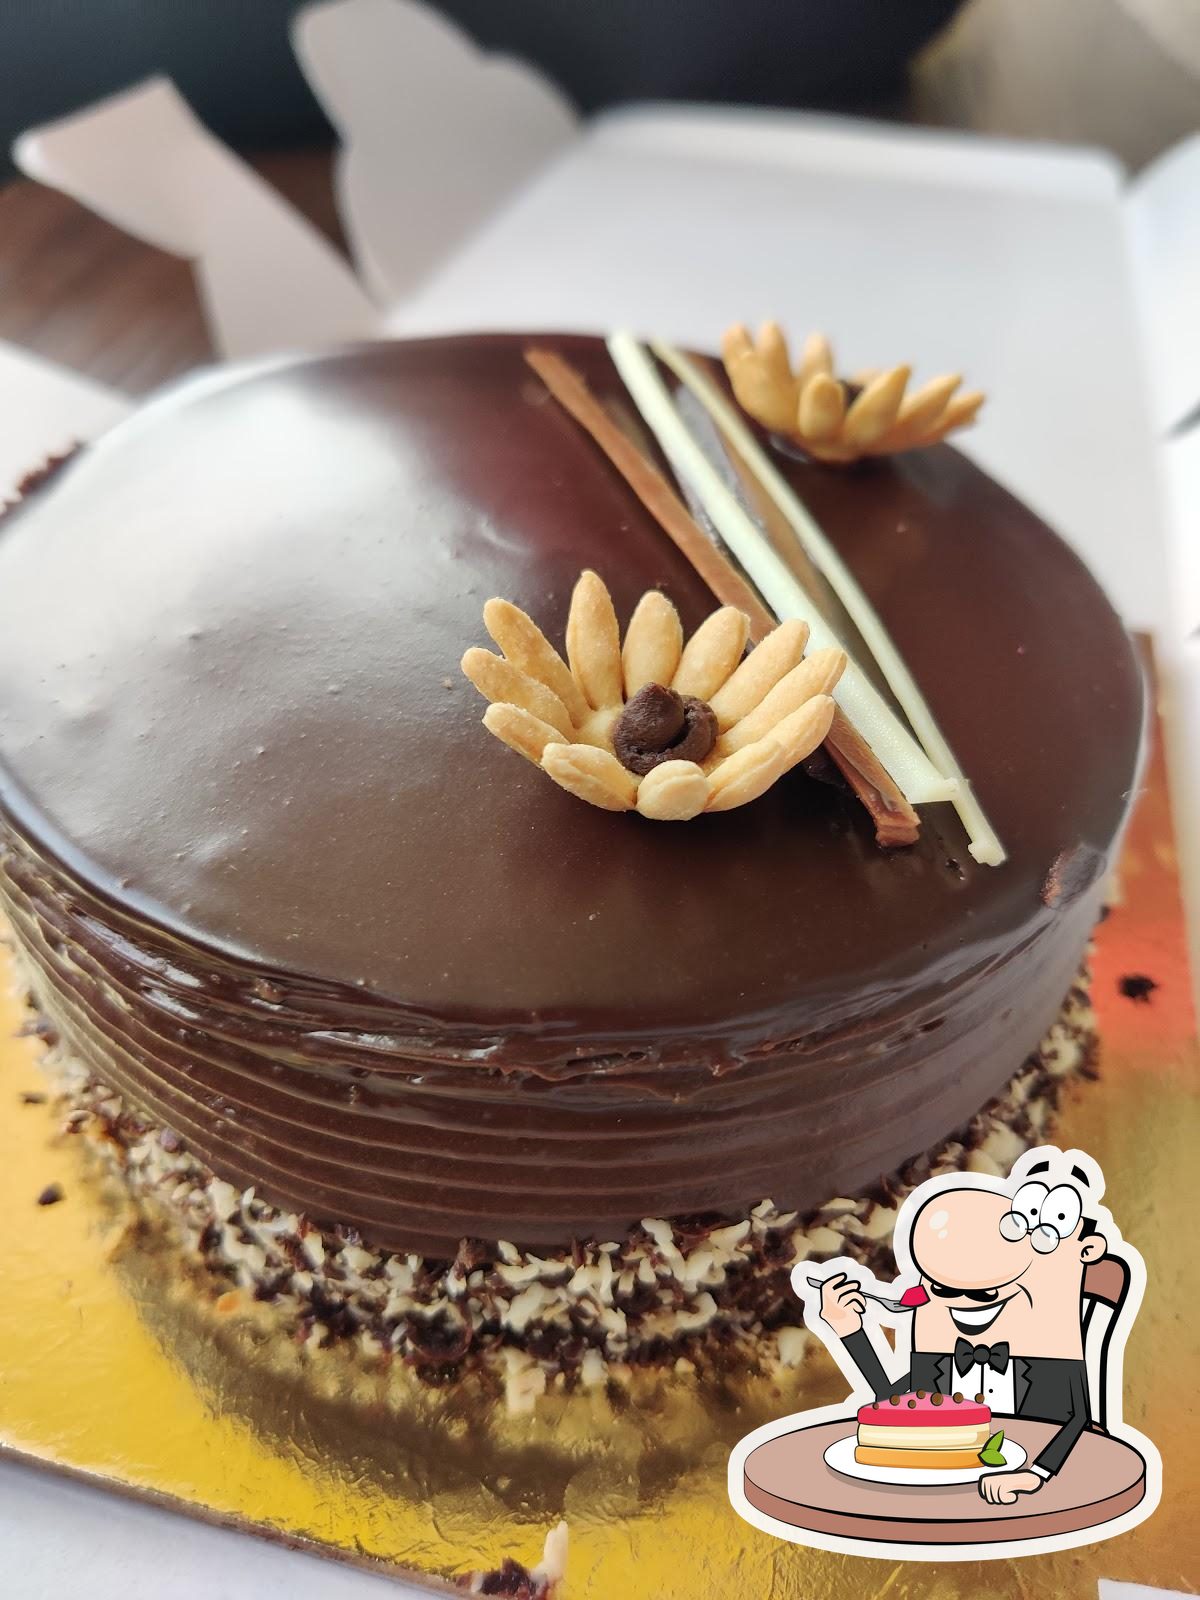 Zestful Flavours by Anjali Kejriwal - DARK CHOCOLATE TRUFFLE Best seller Theobroma  cake Layers of pure dark chocolate sponge sandwiched with the best frosting  and finished with a lot of love to